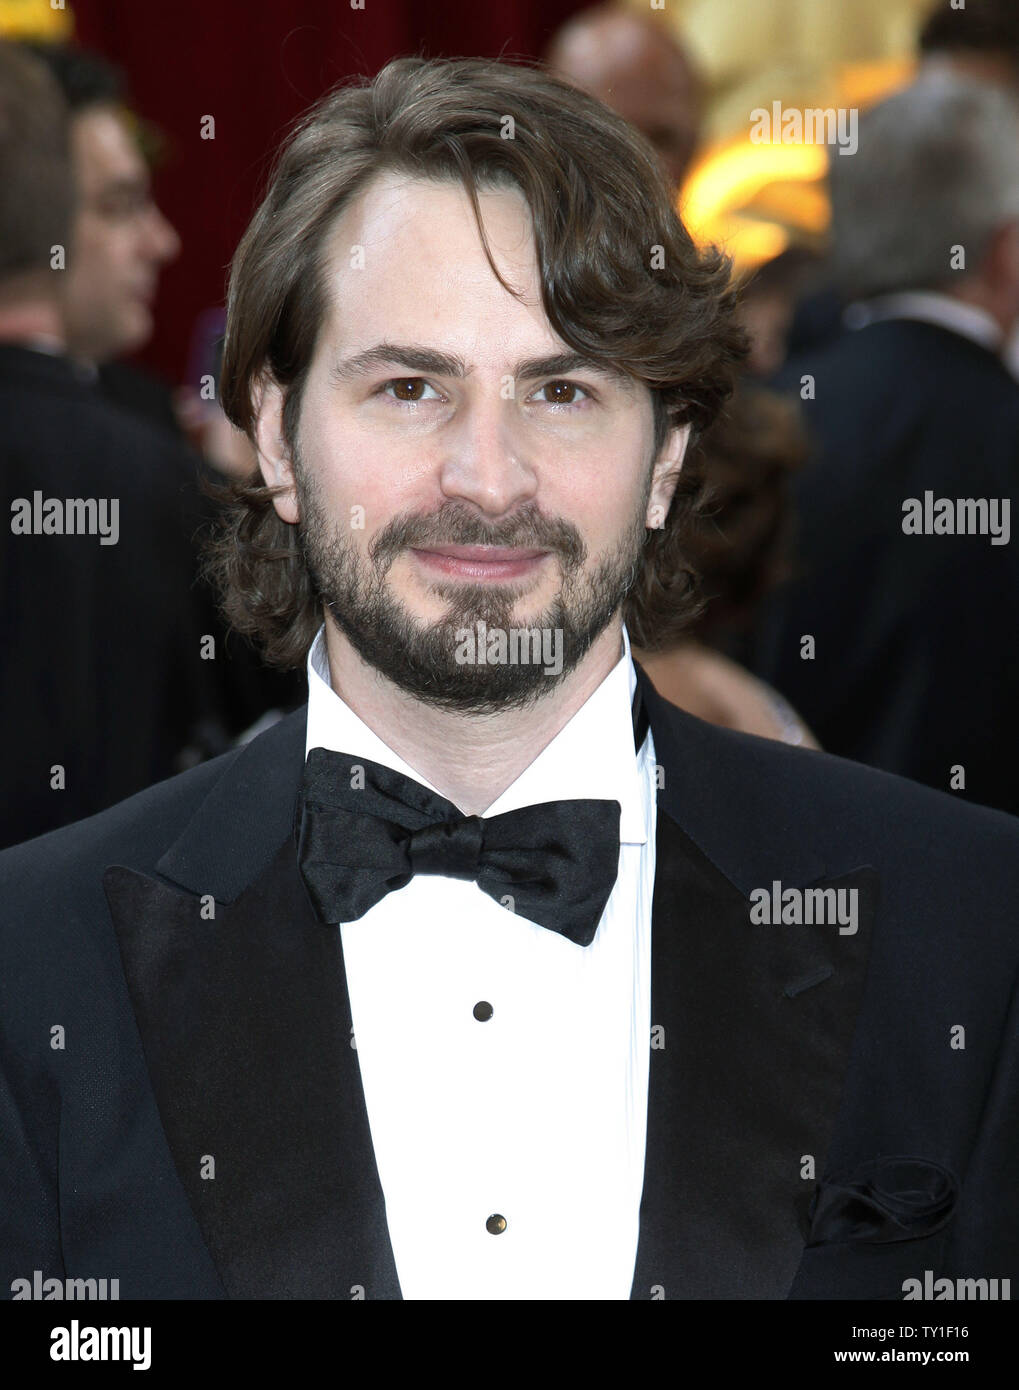 Mark Boal, screenwriter and producer of 'The Hurt Locker,'  arrives at the 82nd Academy Awards in Hollywood on March 7, 2010.   UPI/Phil McCarten Stock Photo